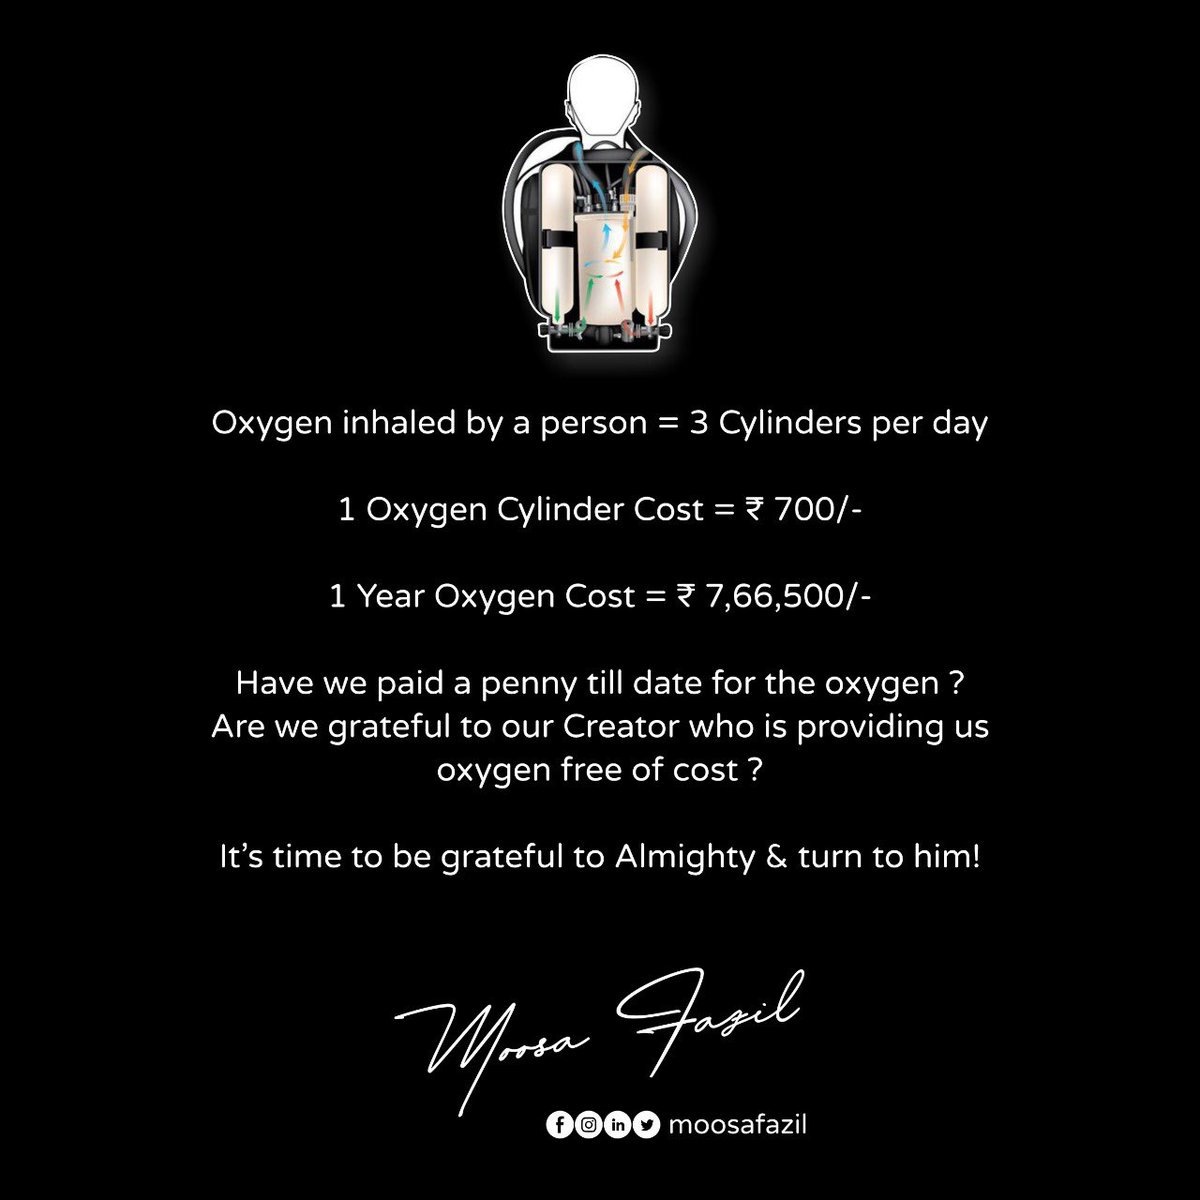 Now we get to know it’s value more, when there is scarcity of Artificial Oxygen Cylinder!

#oxygen #moosafazil #quotes #oxygencylinder #creator #naturaloxygen #freeofcost #covid #corona #coronavirus #covid19 #artificialoxygen #scarcityofoxygen #oxygenconcentrator #oxygenscarcity